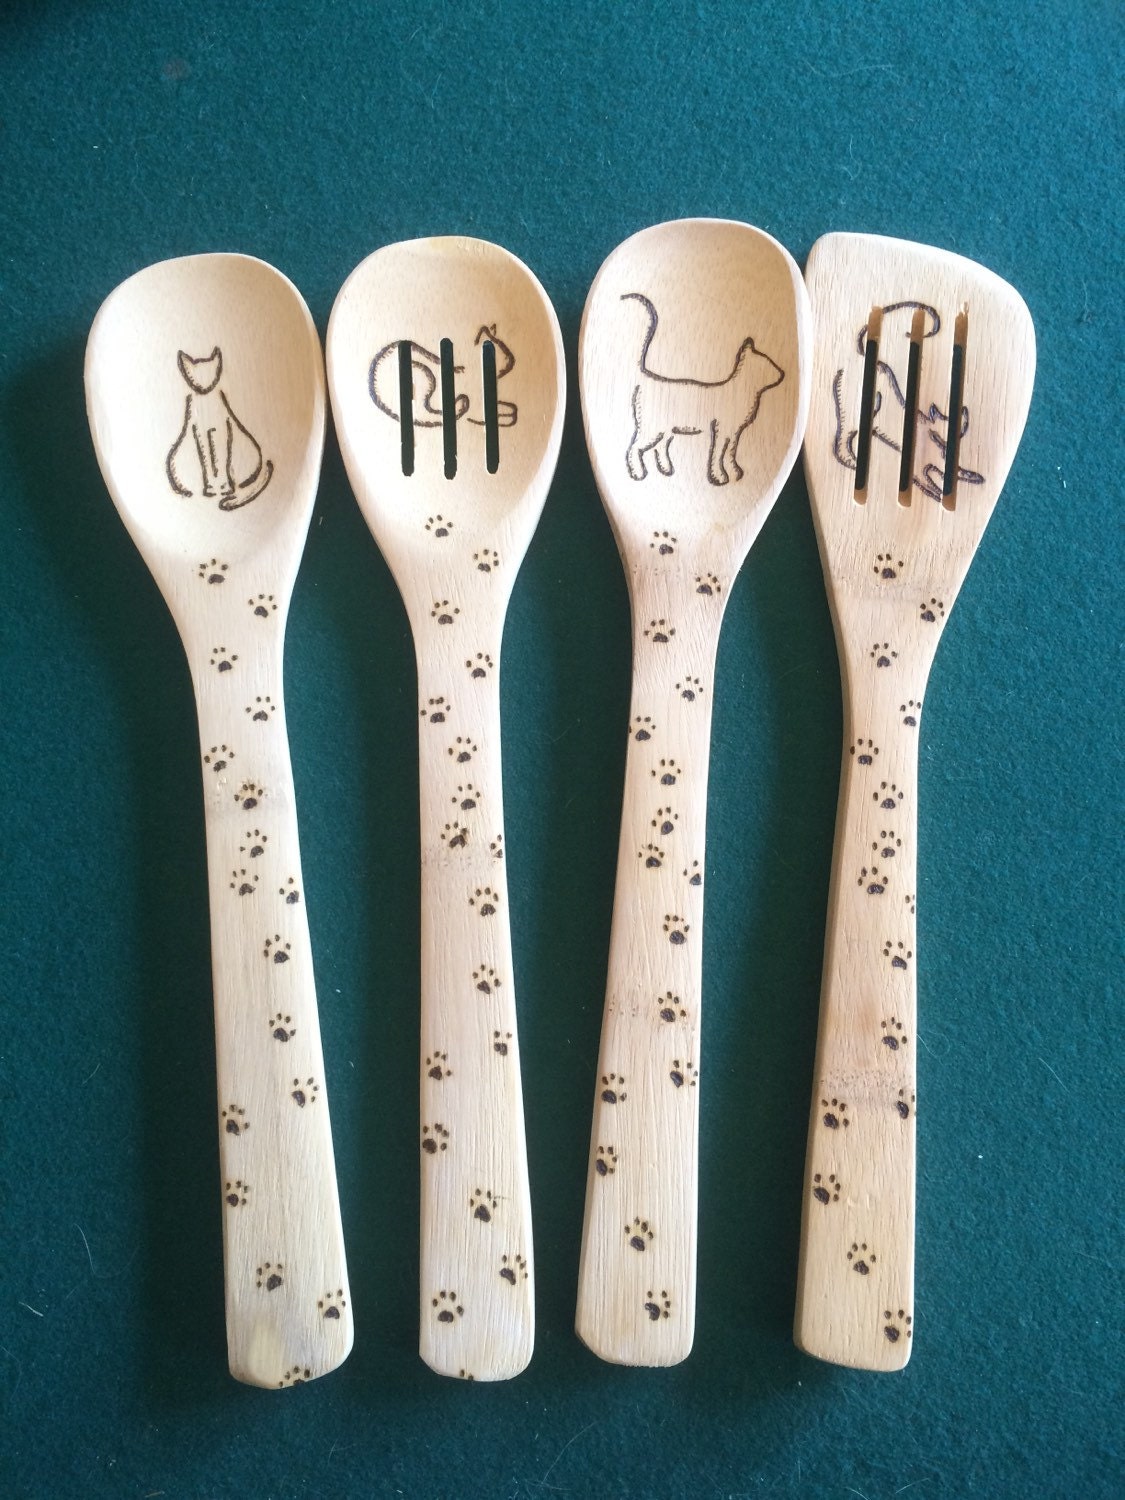 Wooden spoon set wood burned with cats